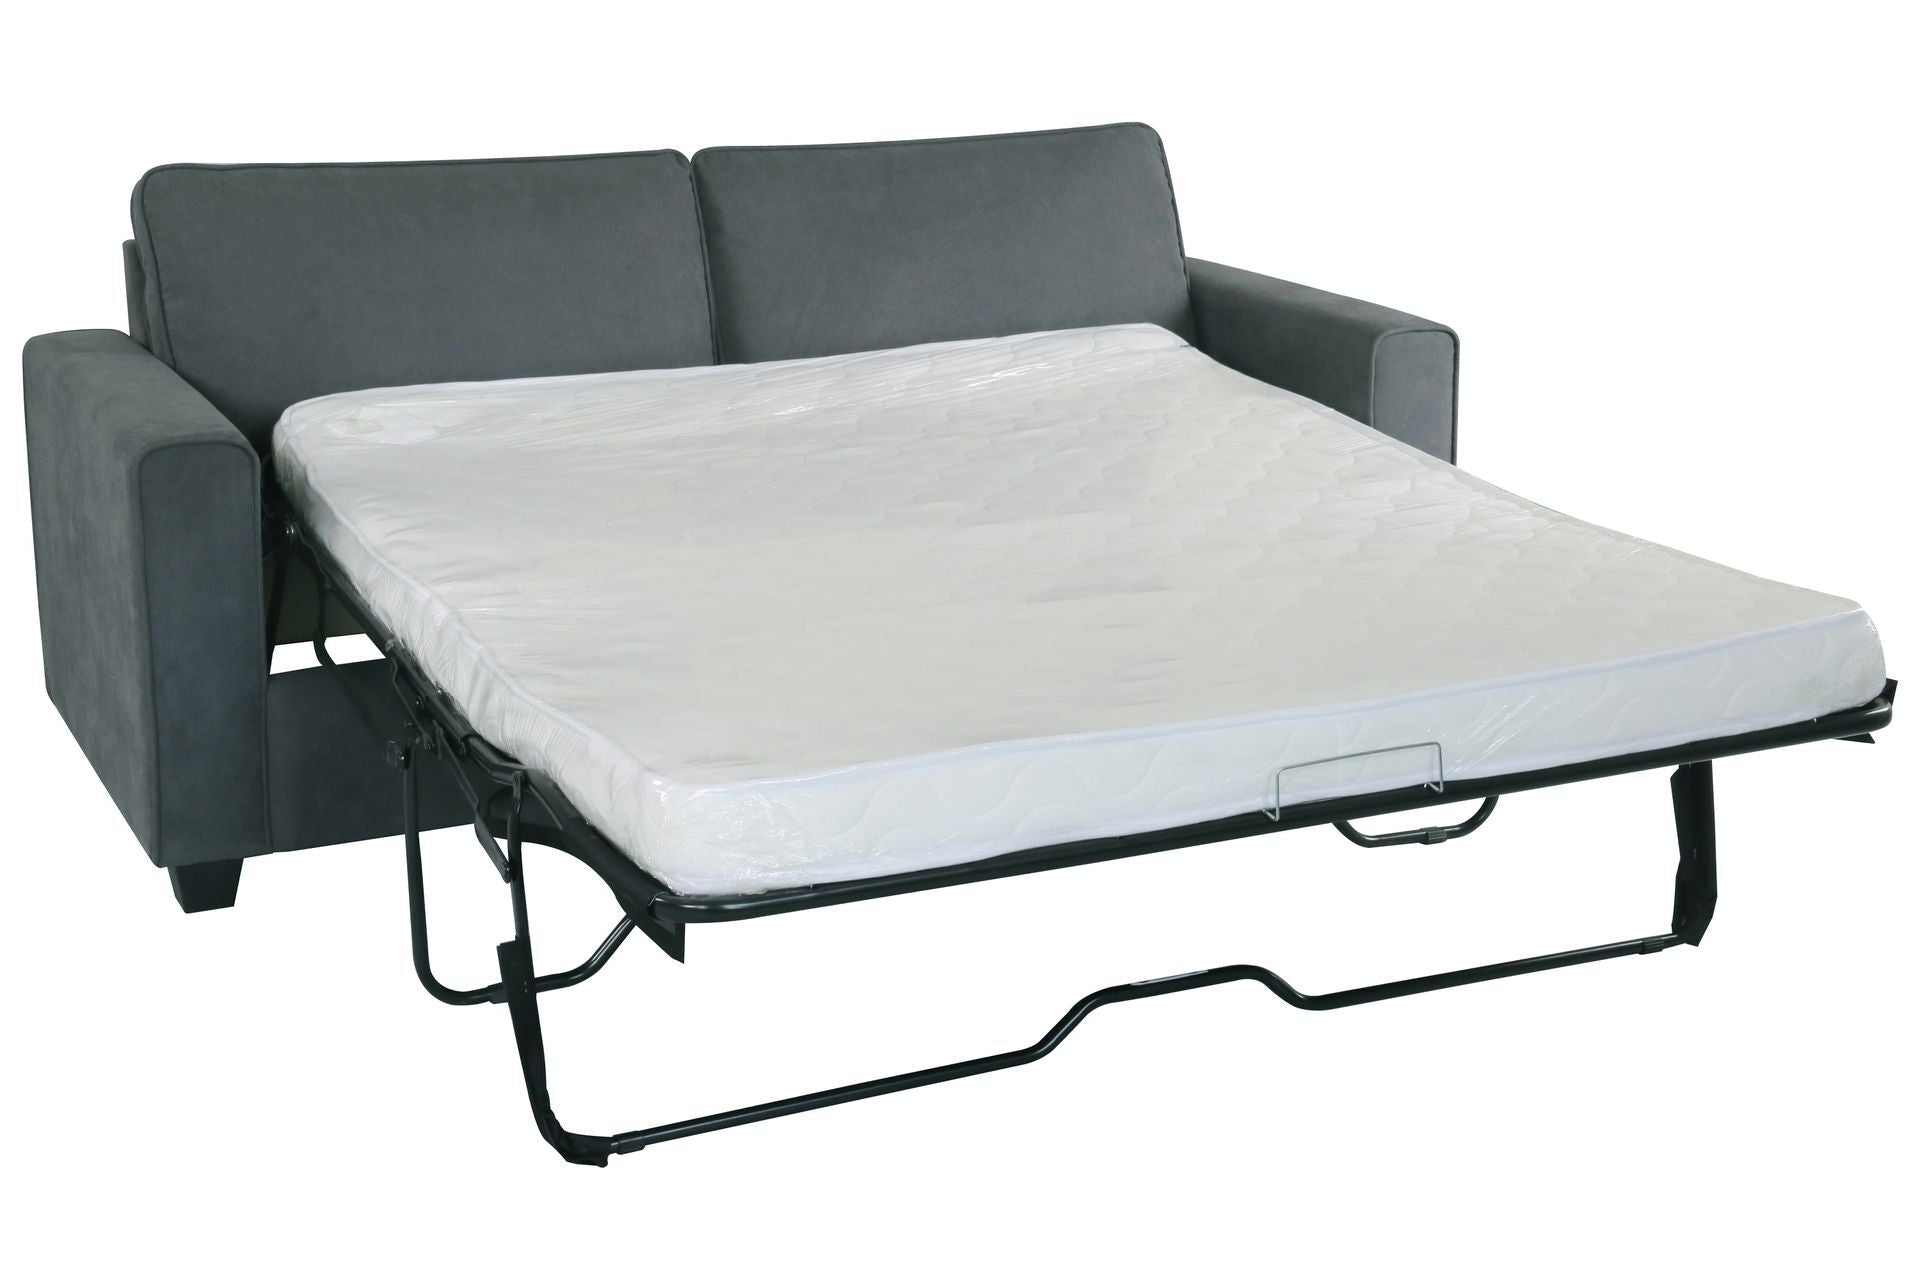 Summit 2 Seater Sofa Bed- Queen Size